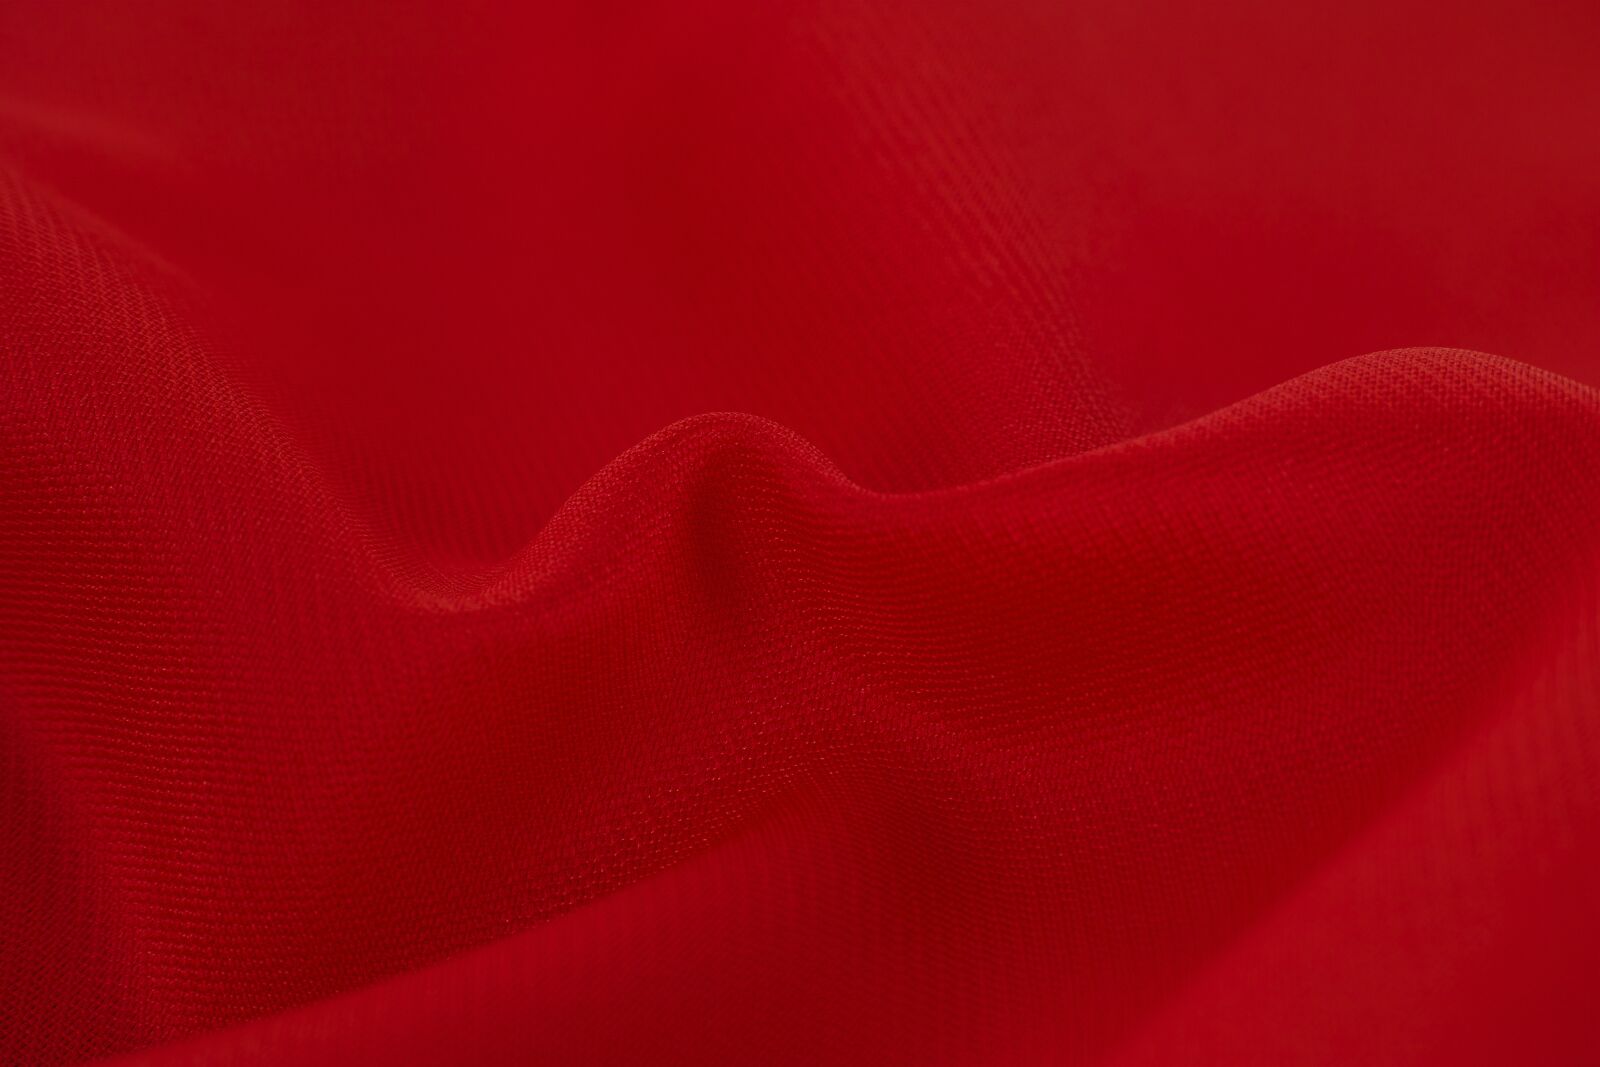 Sigma dp3 Quattro sample photo. Fabric, red, backgrounds photography